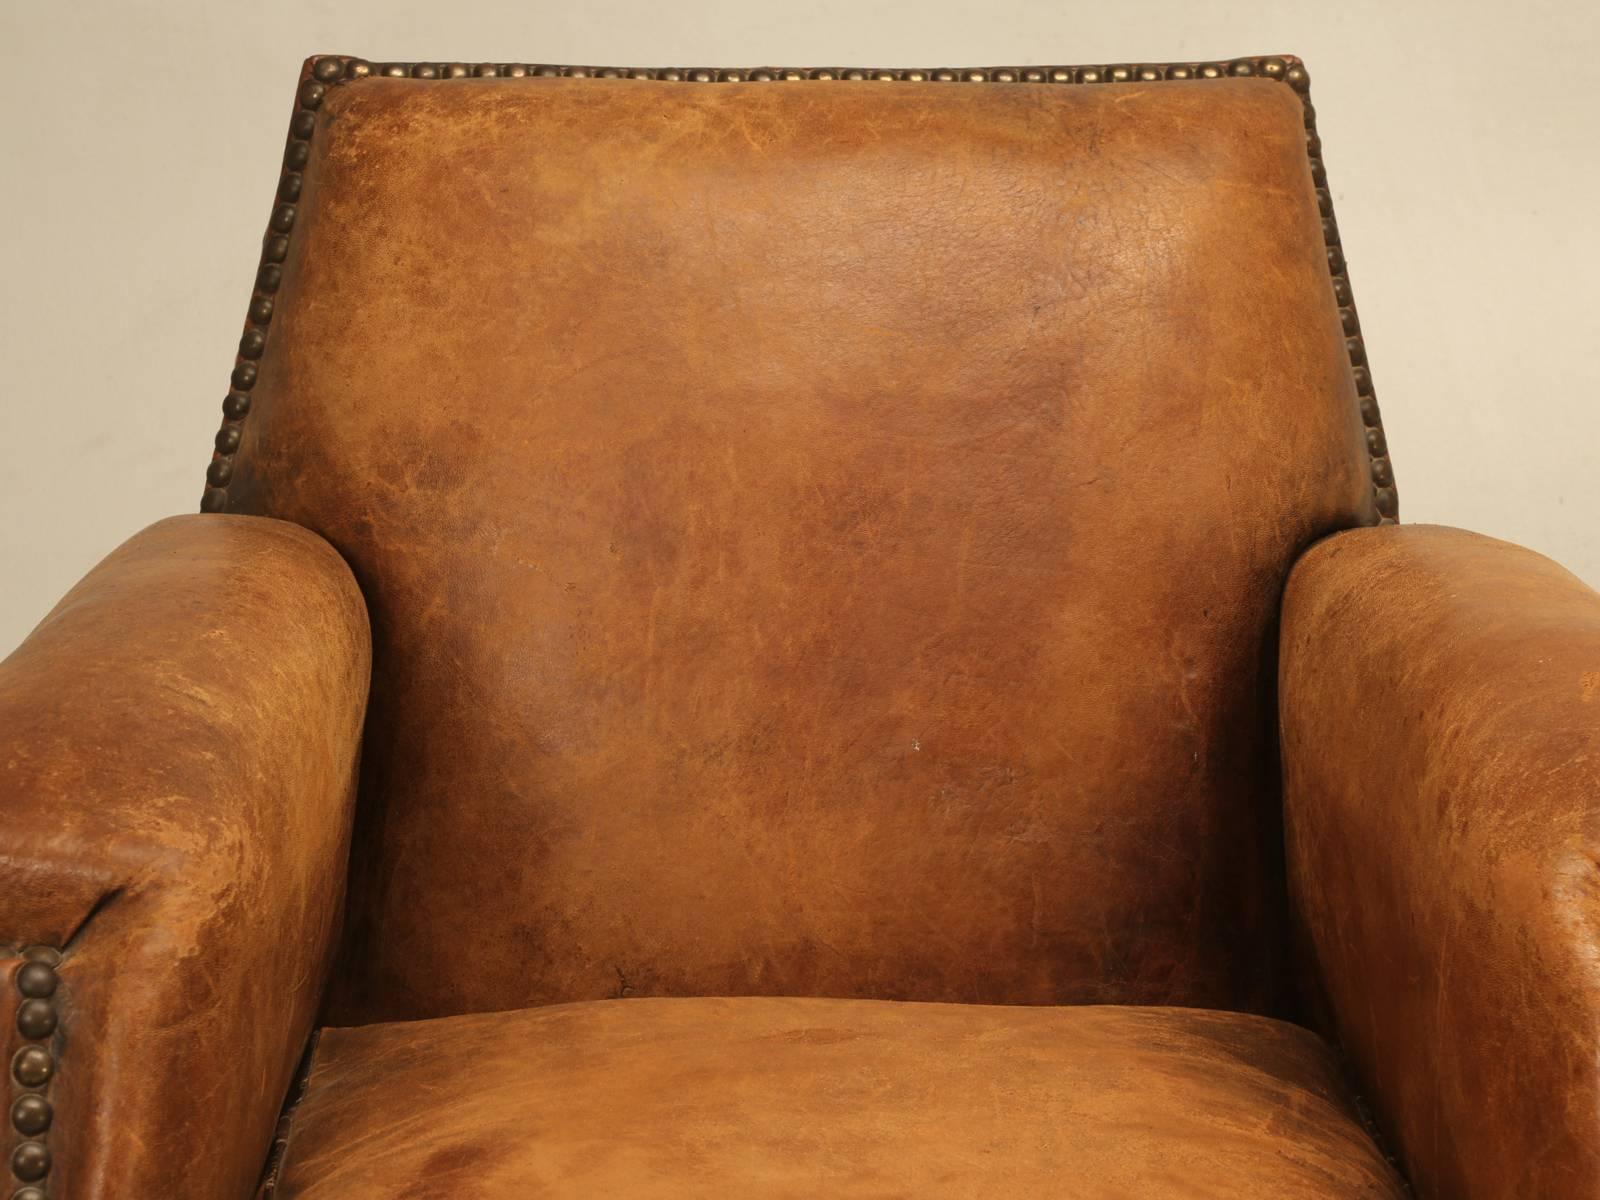 This single French leather club chair is one of those extra deep; meaning super comfortable club chairs that are becoming more difficult to purchase in their original leather. Our Old Plank upholstery department completely disassembled the frame to